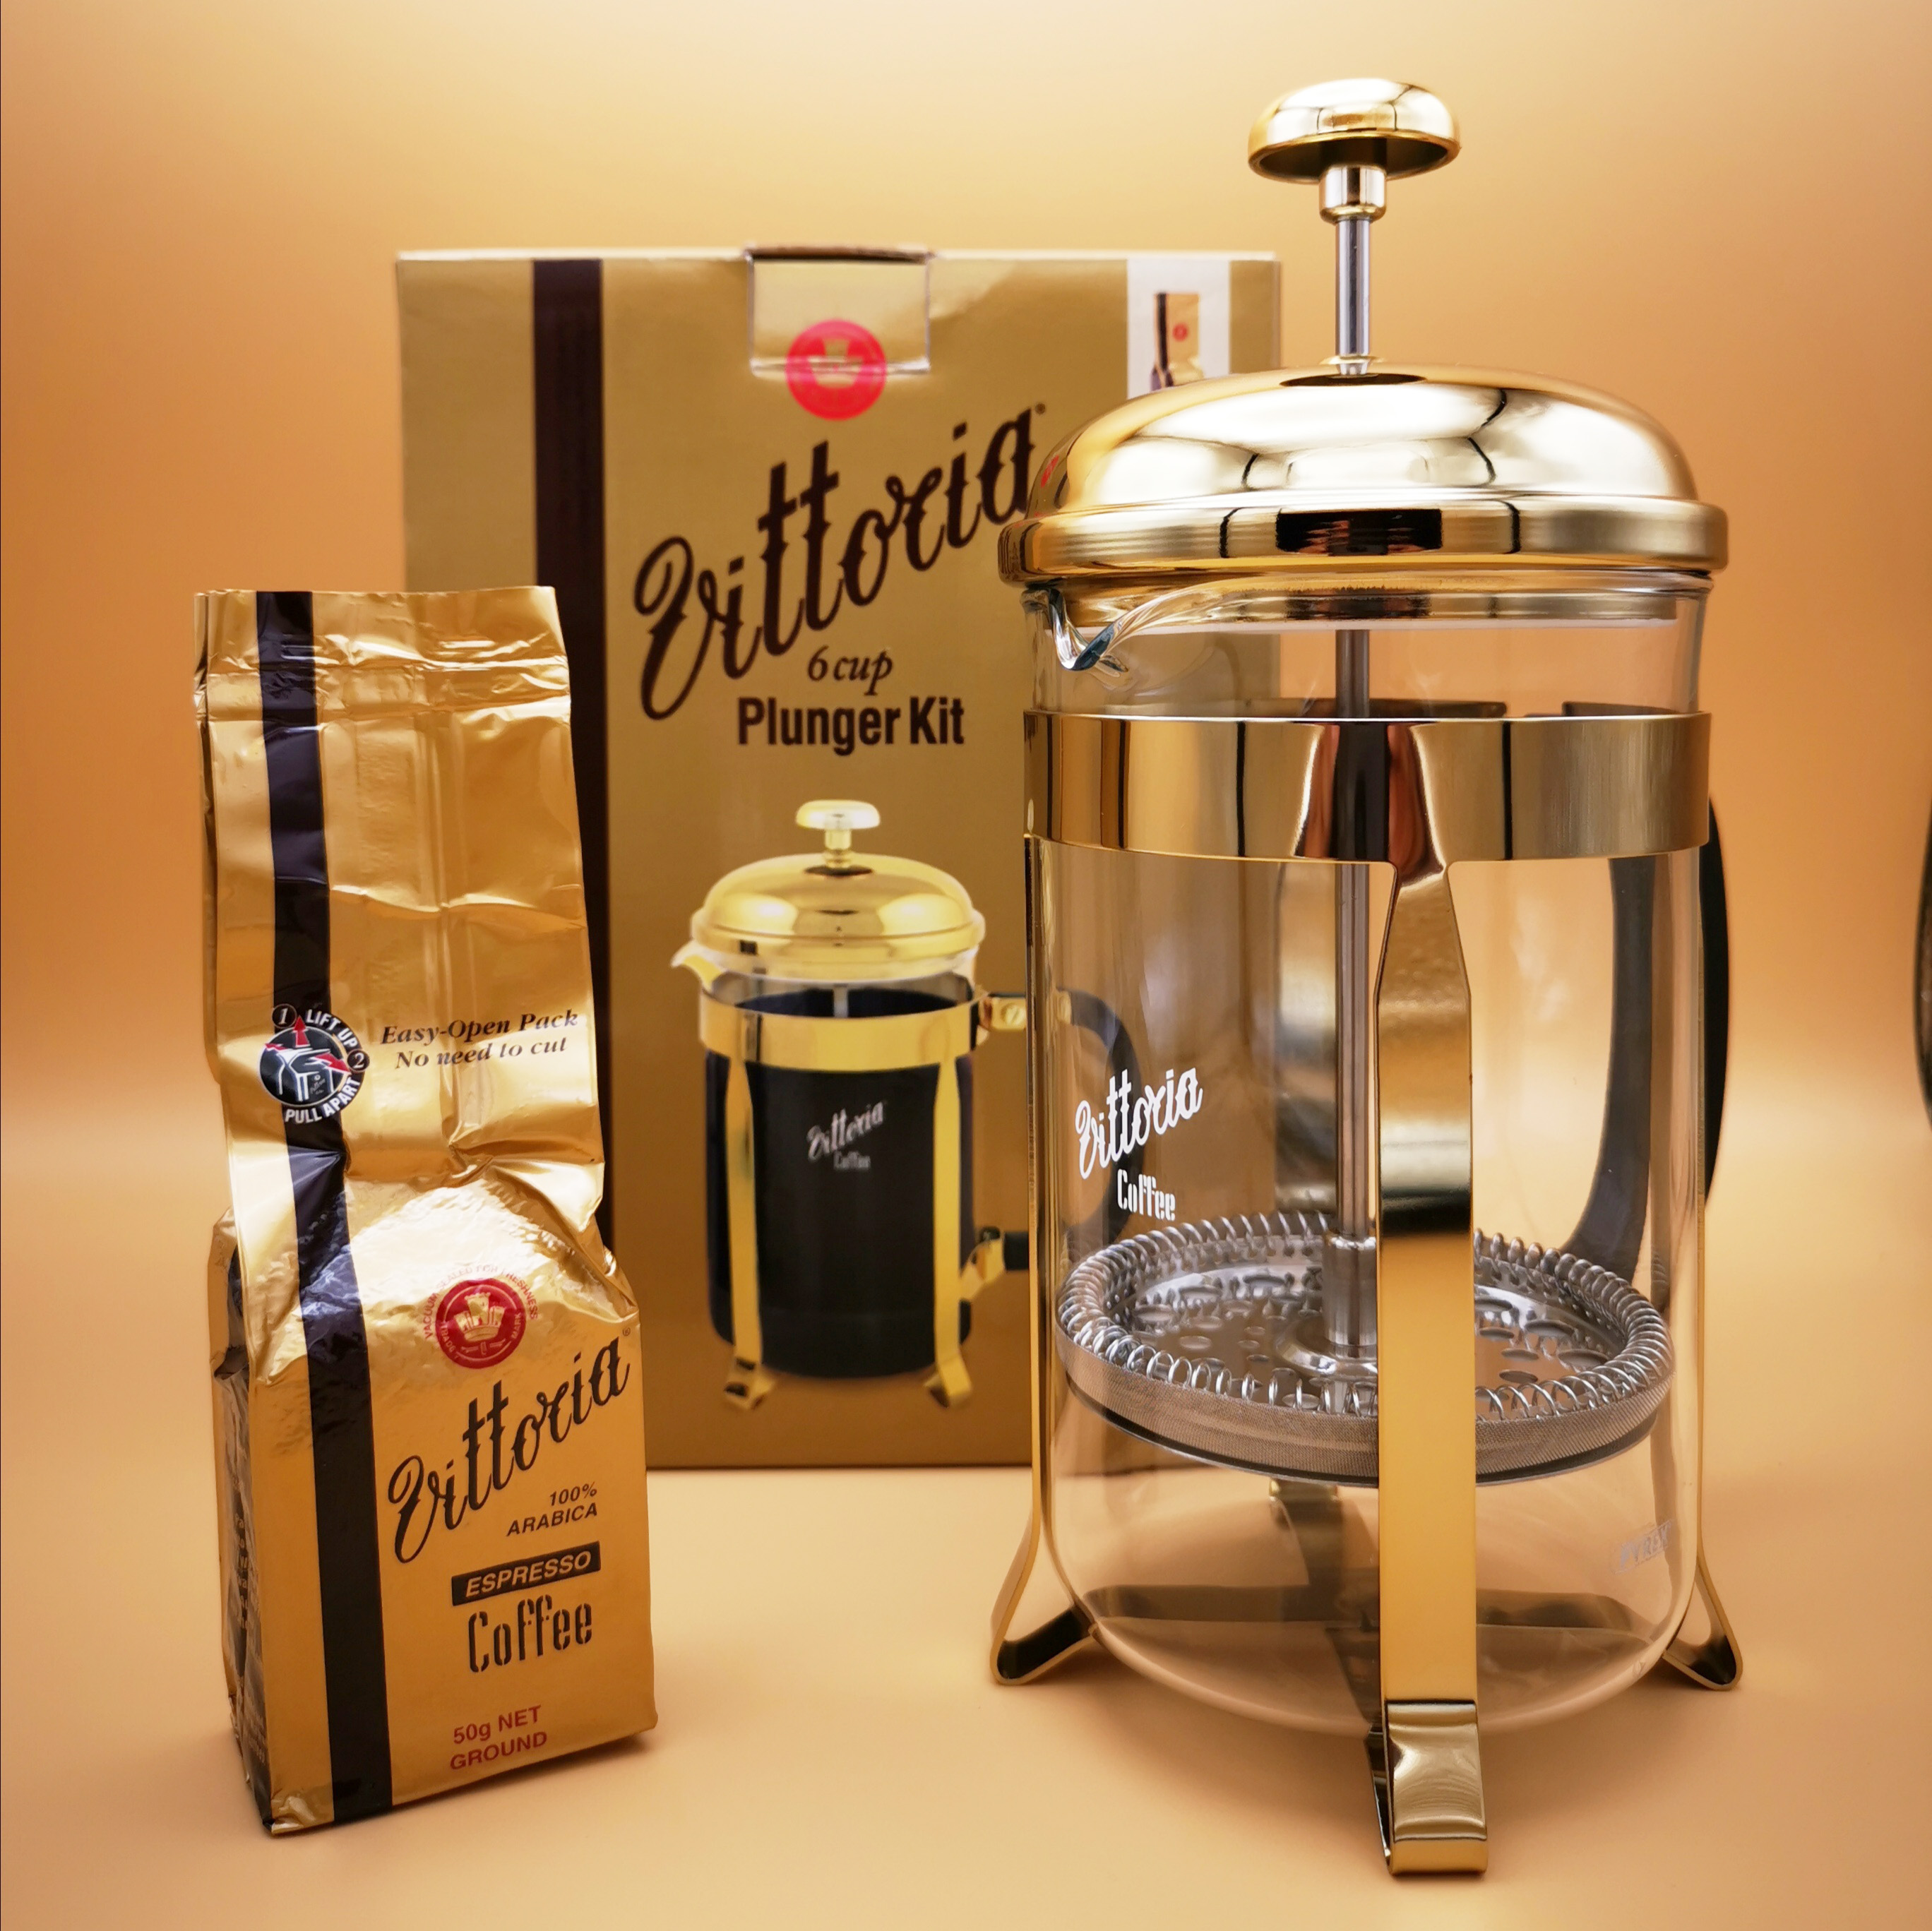 Plunger Kit Vittoria Coffee 6 Cups Size (French press)